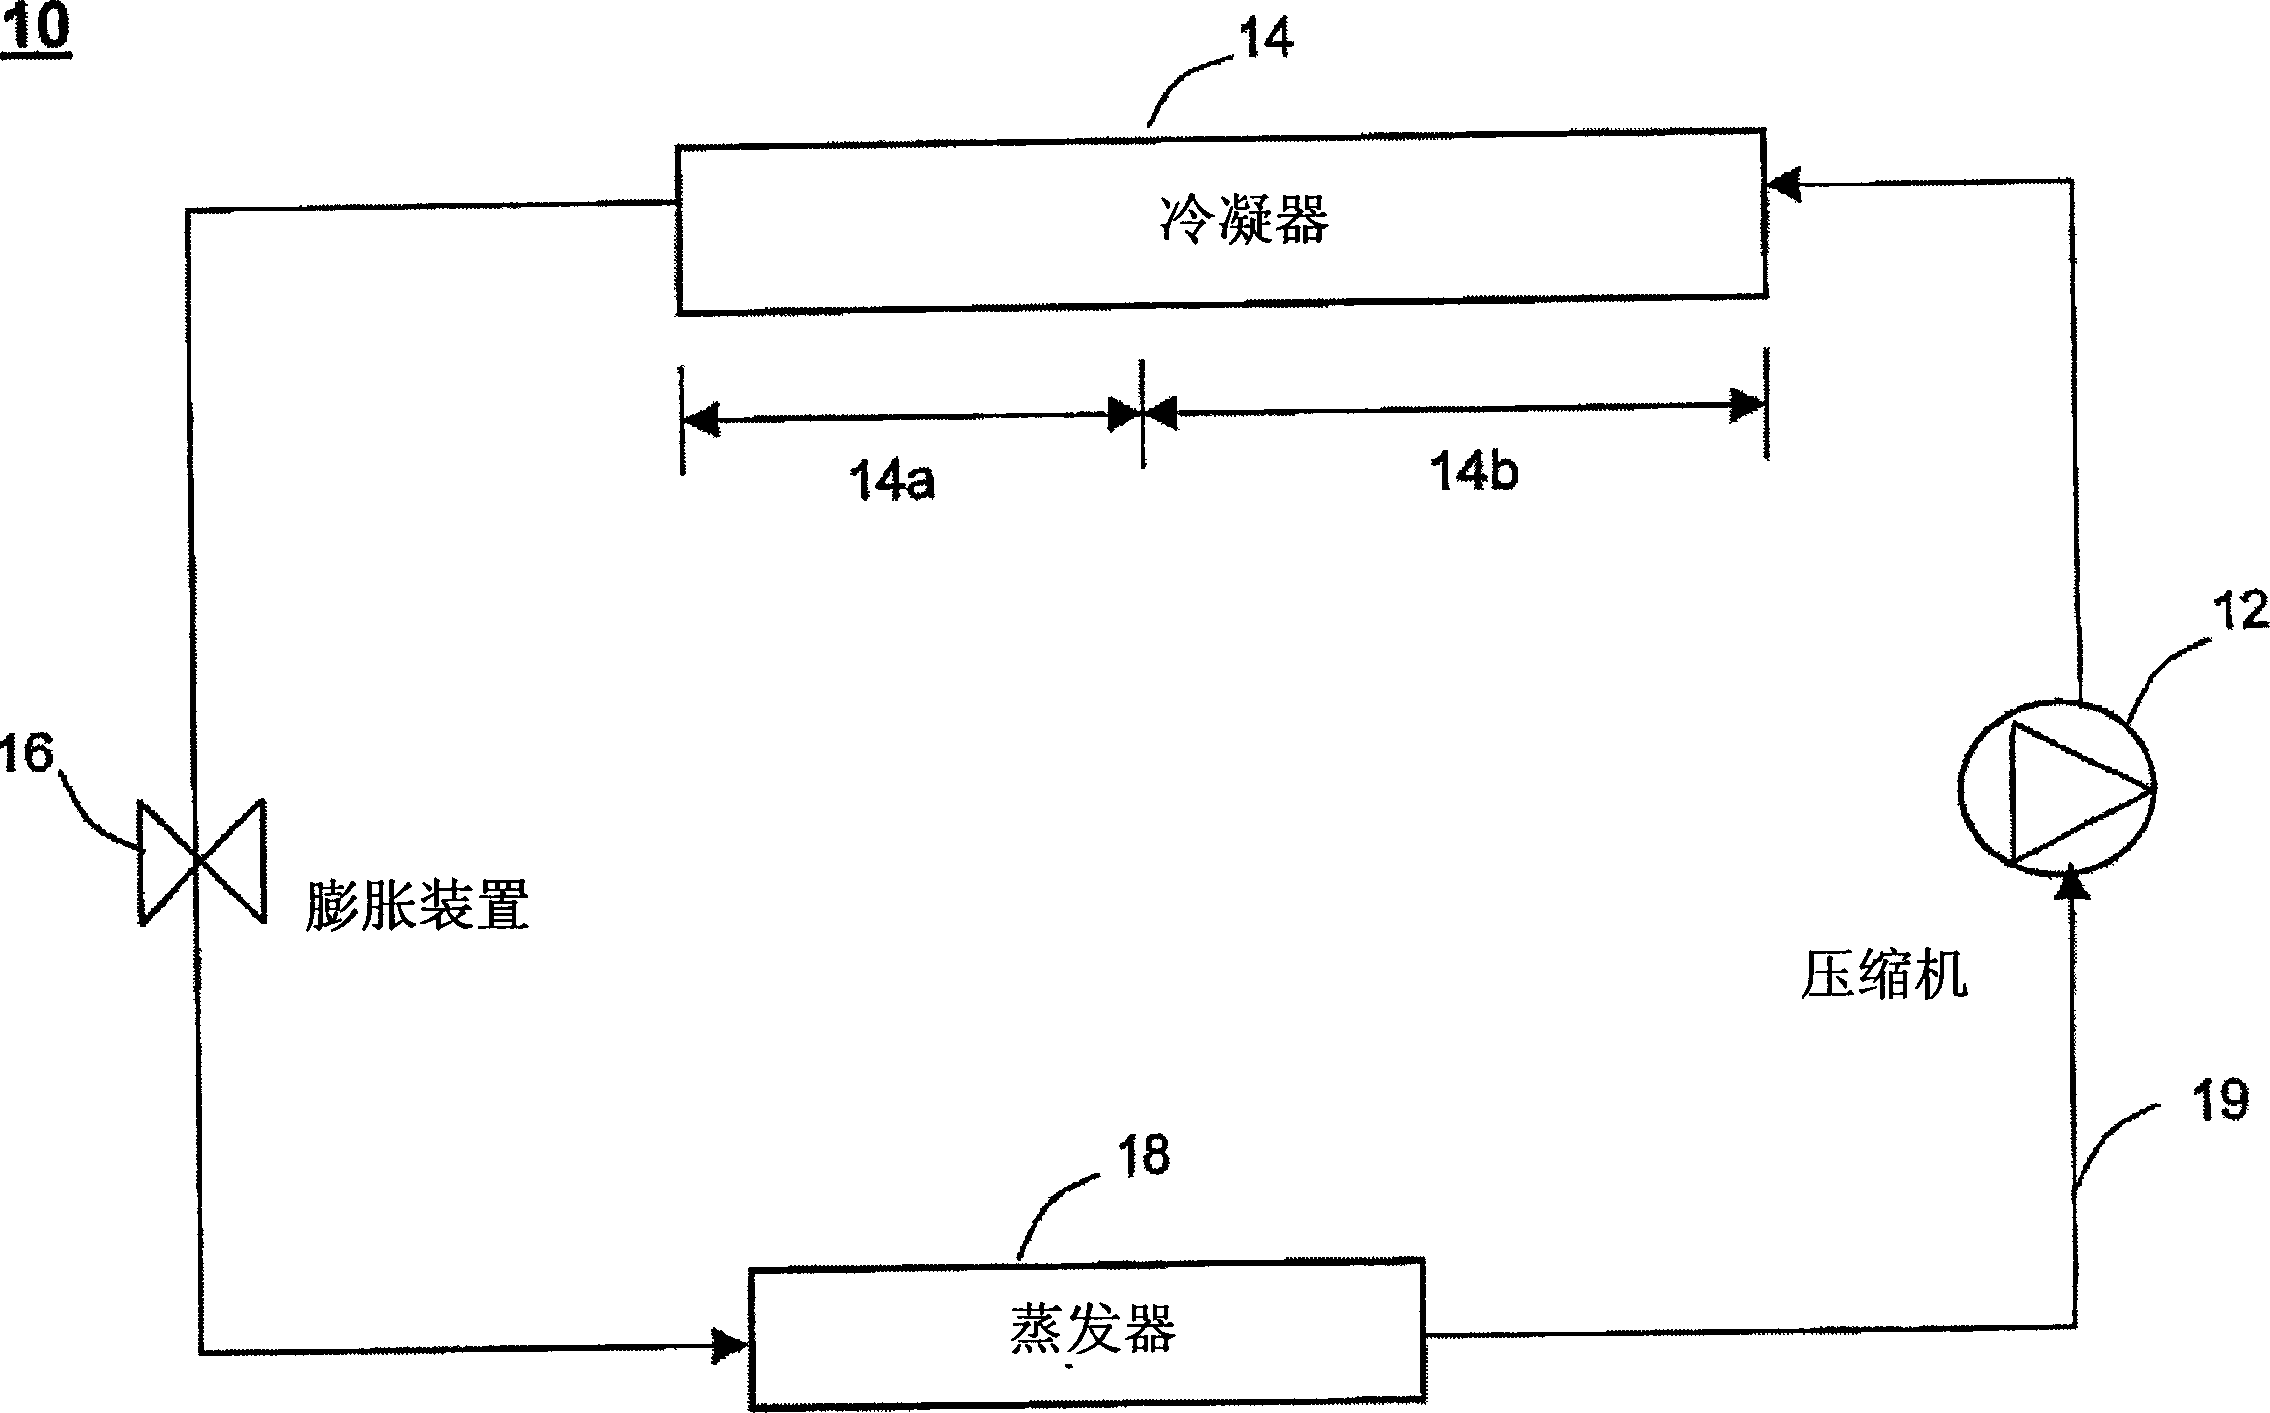 Refrigeration system with bypass subcooling and component size de-optimization